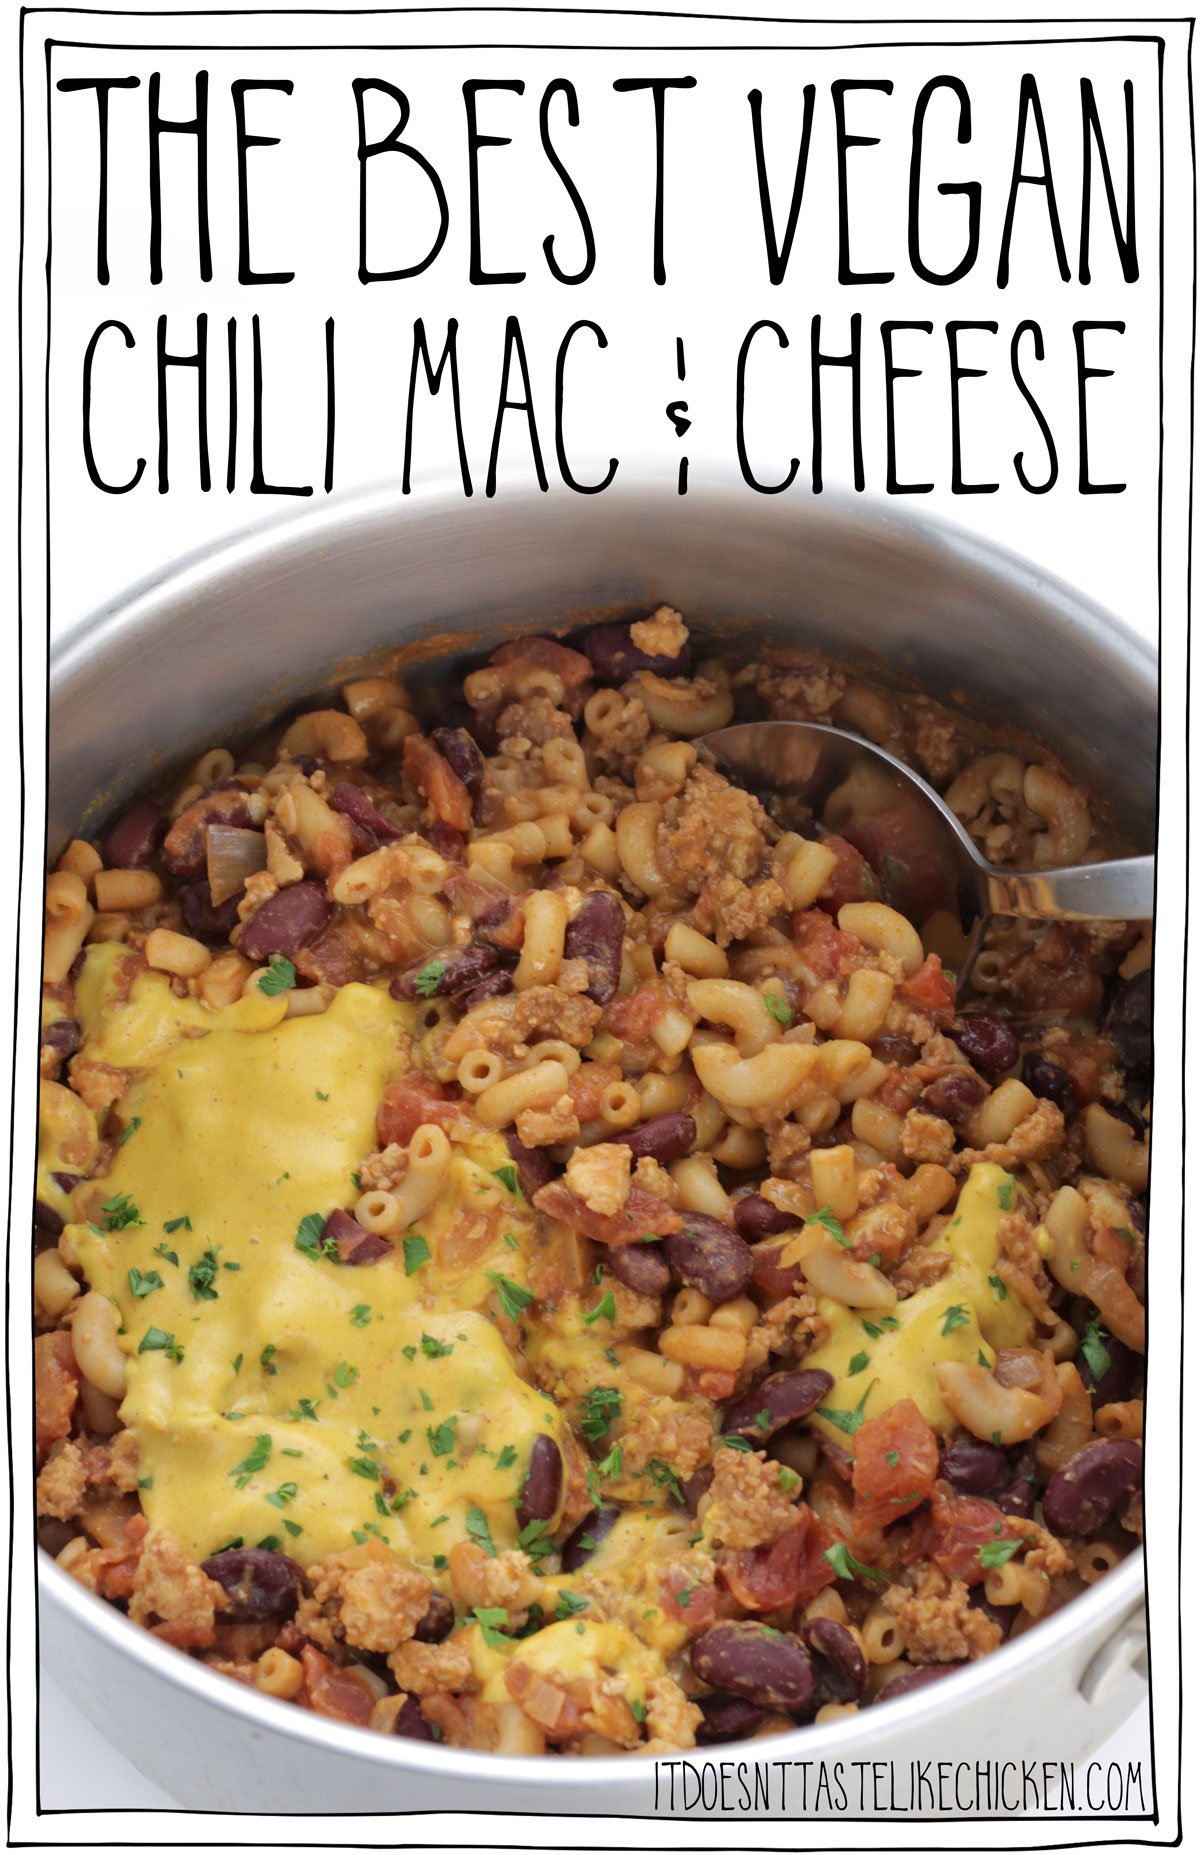 The Best Vegan Chili Mac and Cheese! Hearty, vegan meaty, vegan cheesy, total comfort food bliss! Easy to make and can be made ahead of time. You won't even know it's vegan!! #itdoesnttastelikechicken #veganrecipes